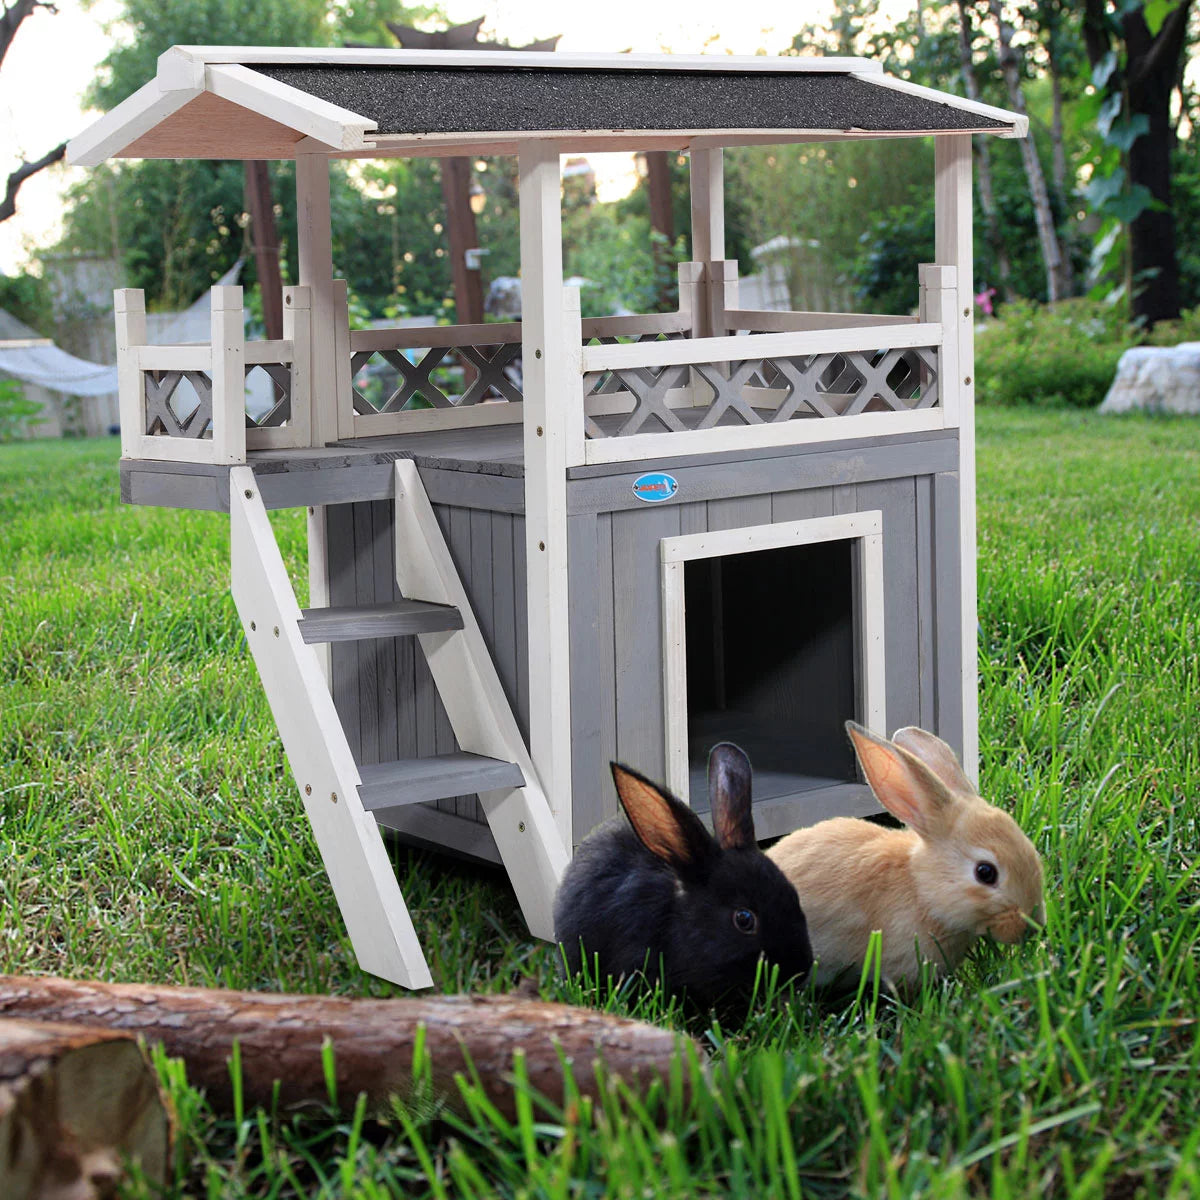 Lowestbest Dog House, Natural Wooden Dog House Home with Steps Balcony Puppy Stairs, Outdoor Weather-Resistant Cat Condo Pet House